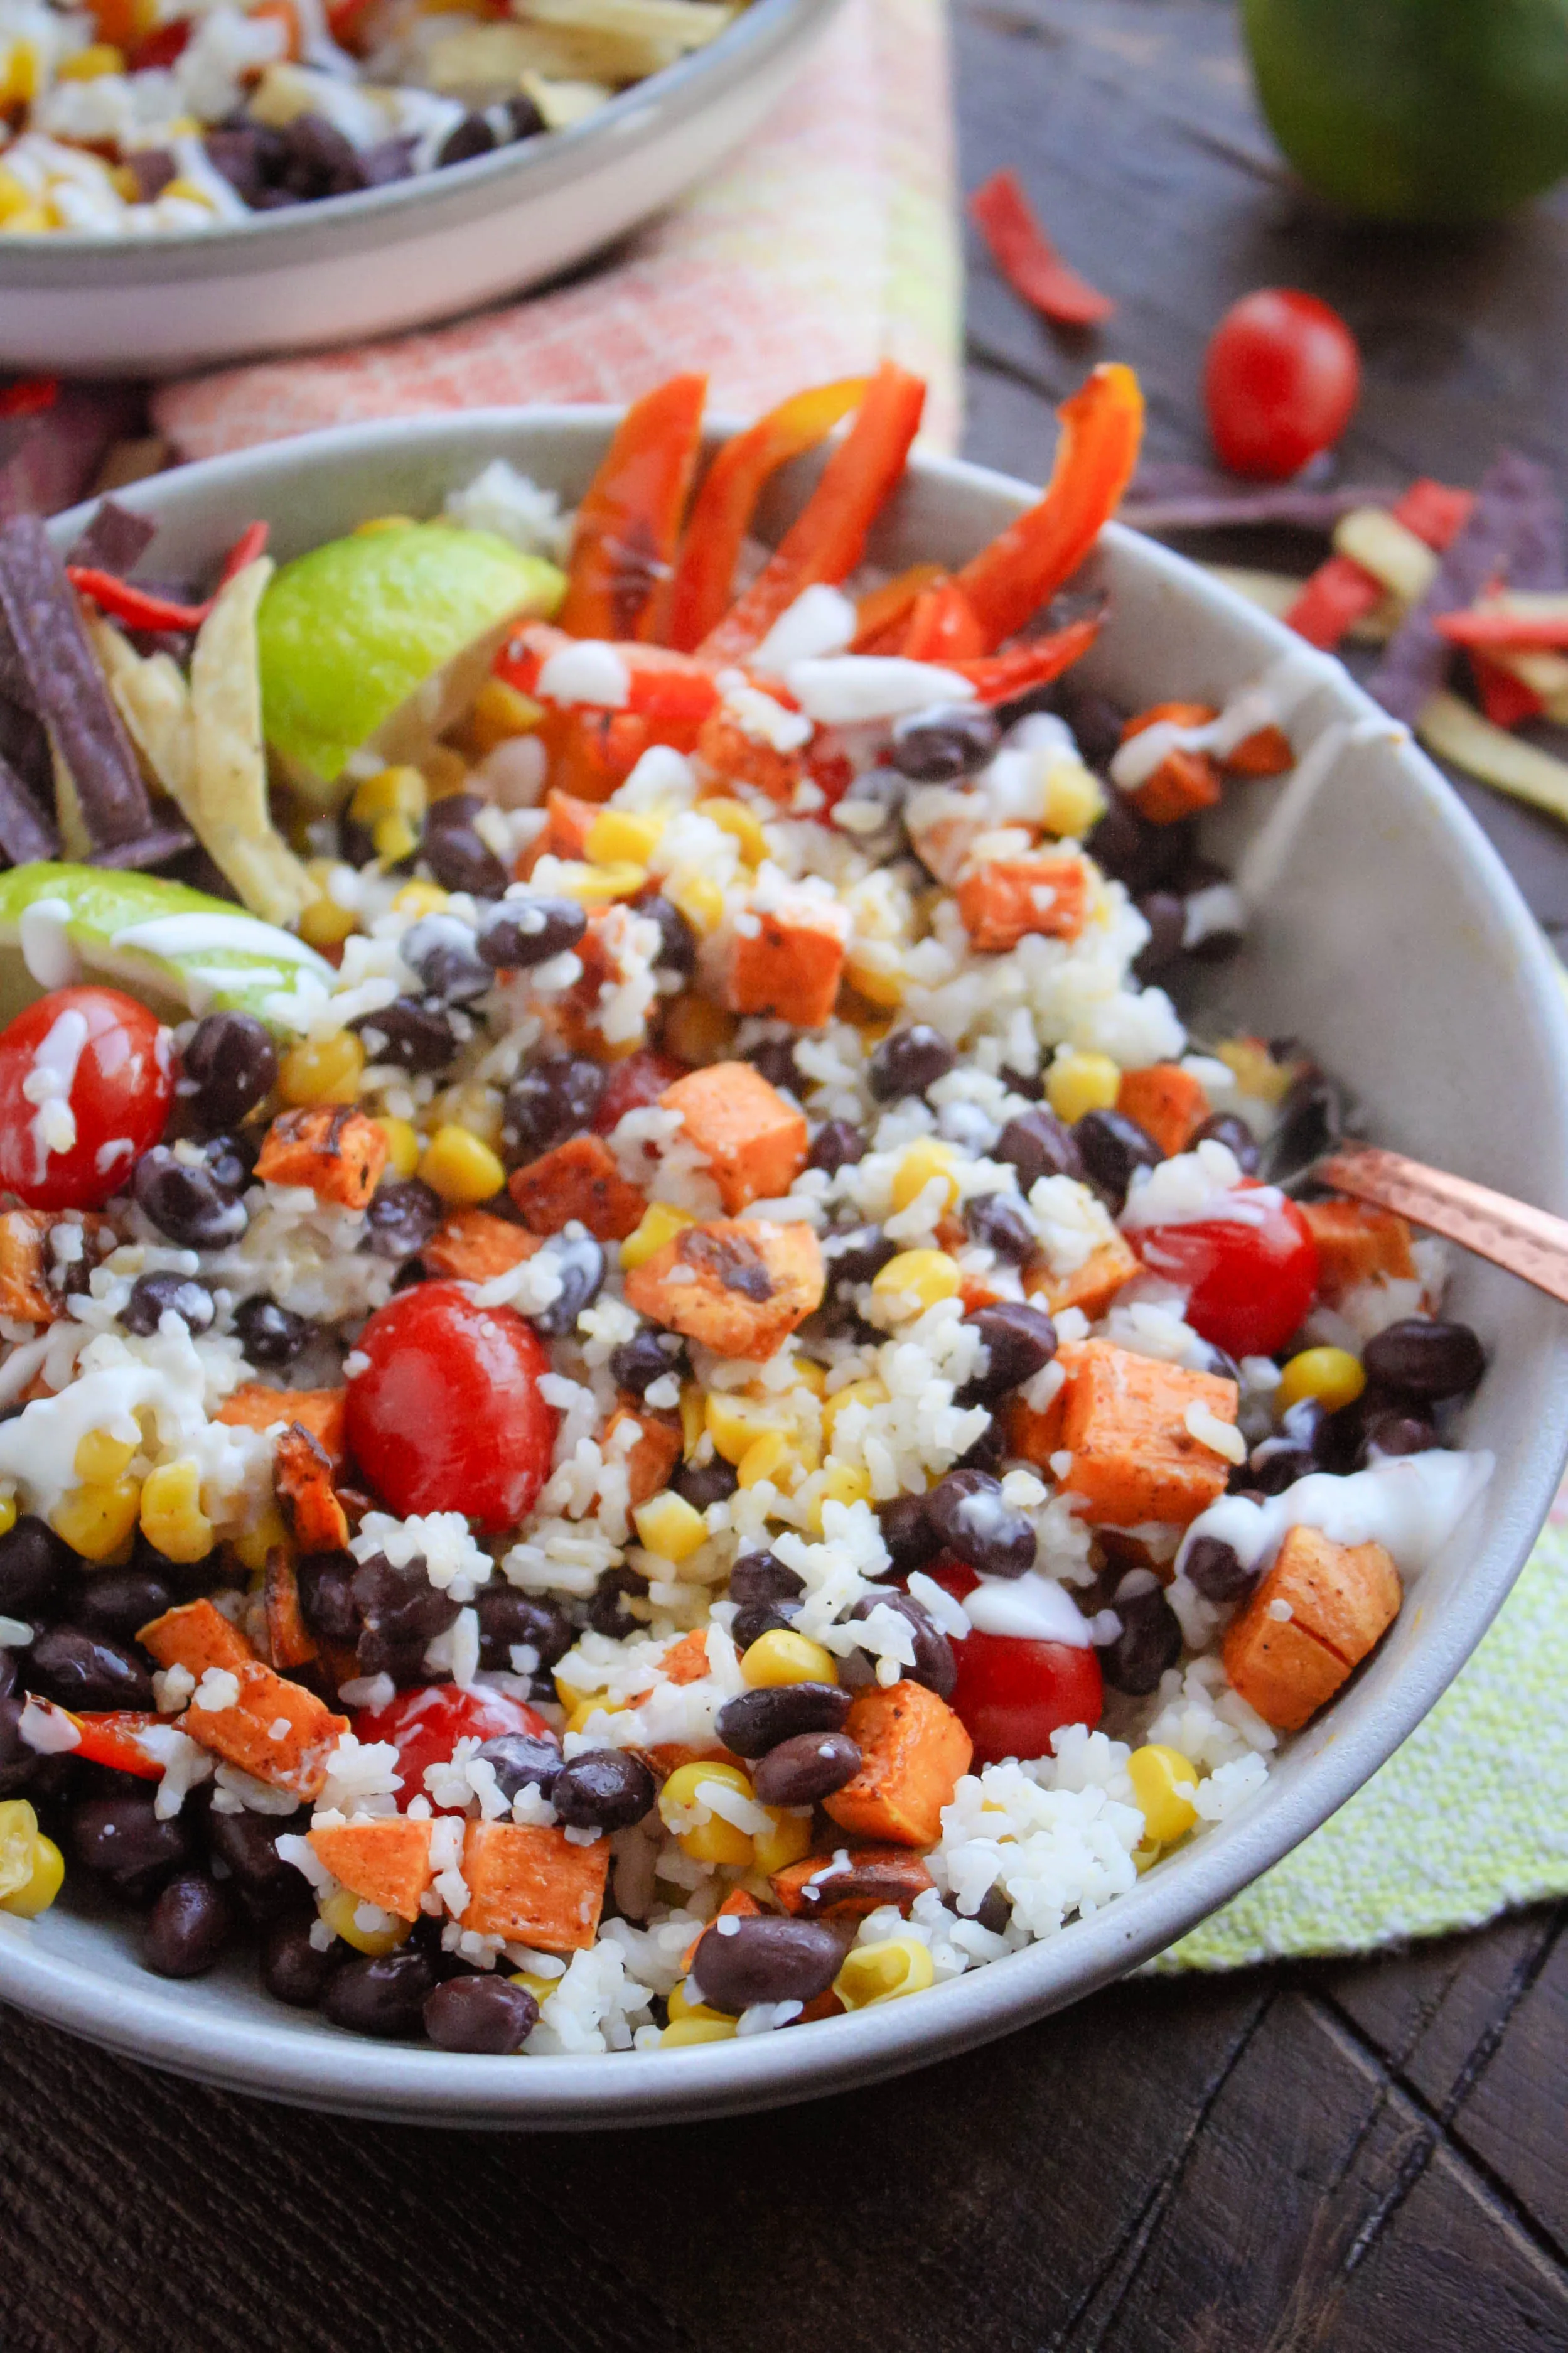 Easy Veggie and Black Bean Pantry Bowls are a delight! You should try these bowls for your next meal.